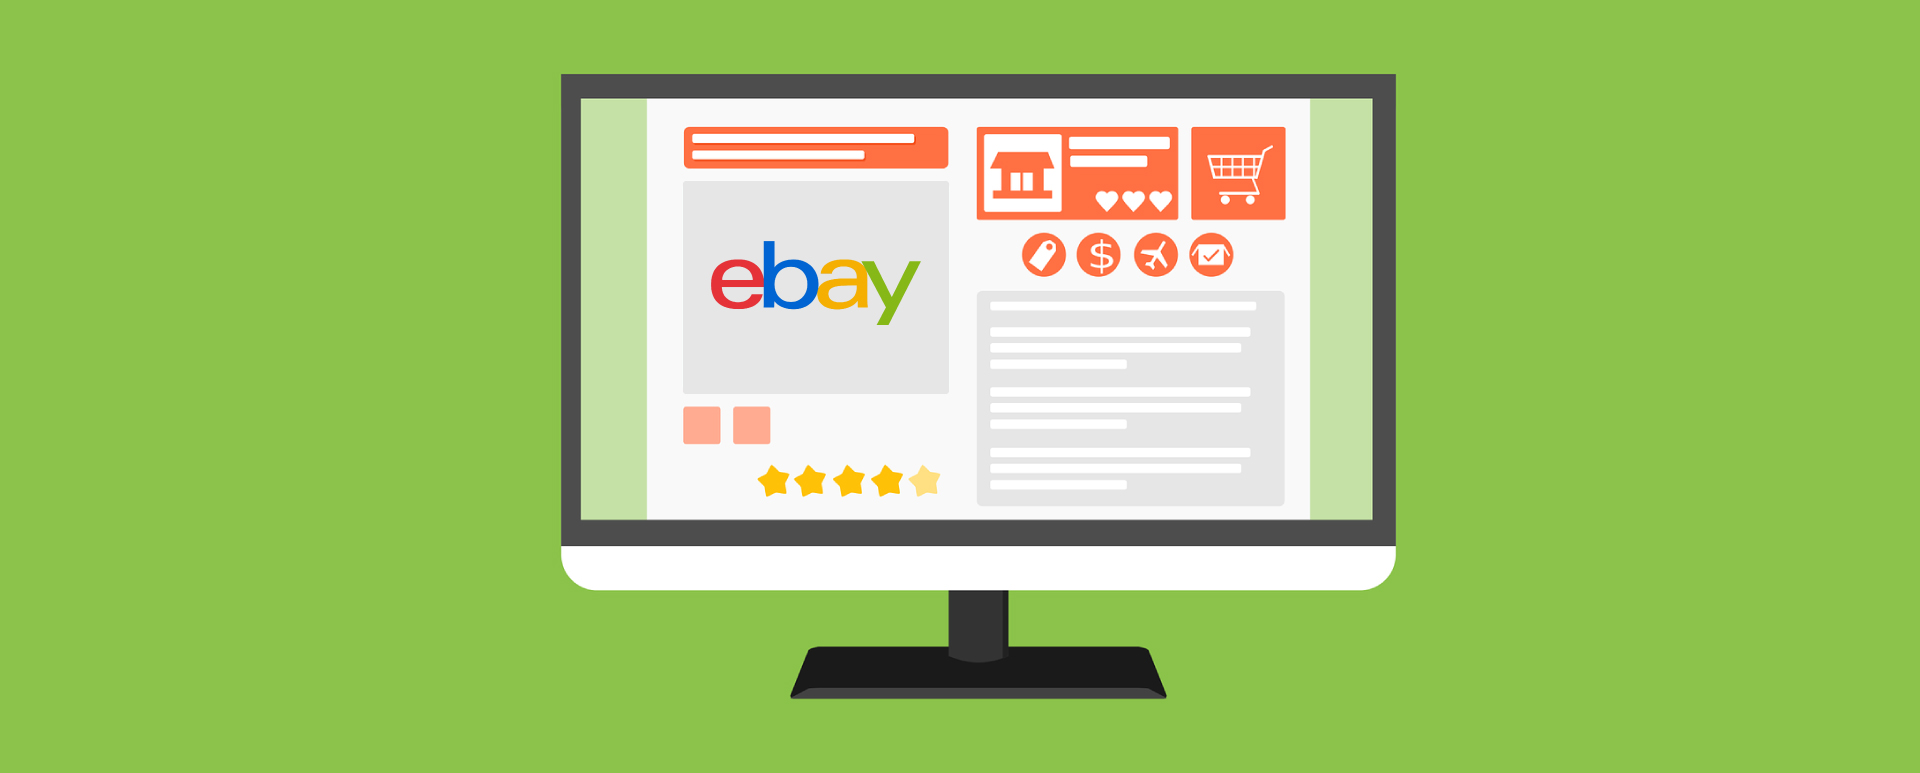 Graphic design of the eBay store on a desktop computer.